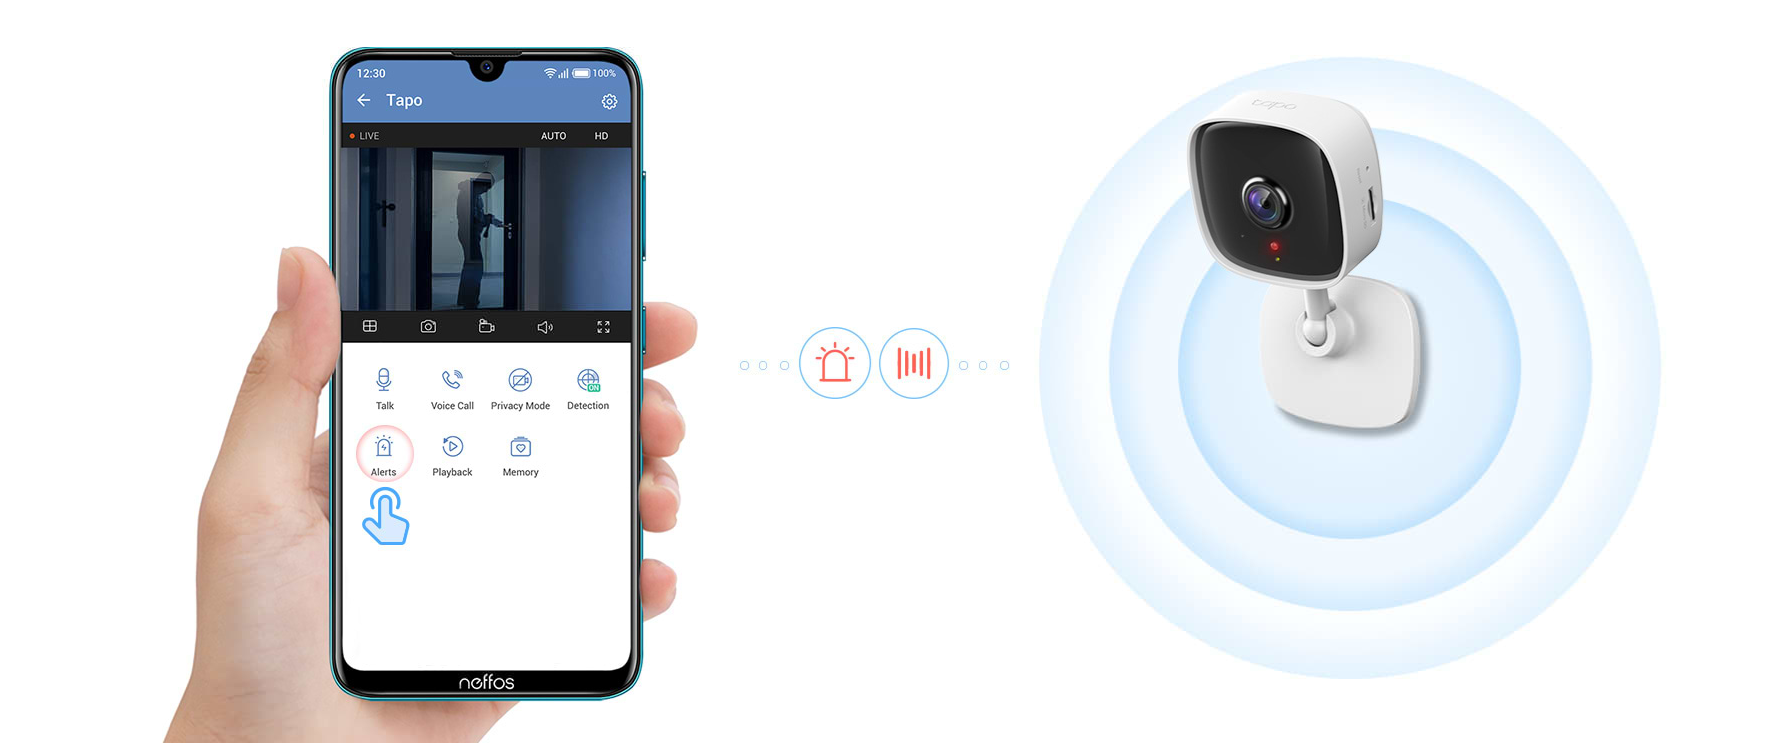 Alarm System
Not only will the camera send notifications to you when motion is detected, it’ll also trigger lights and sounds as an alarm.